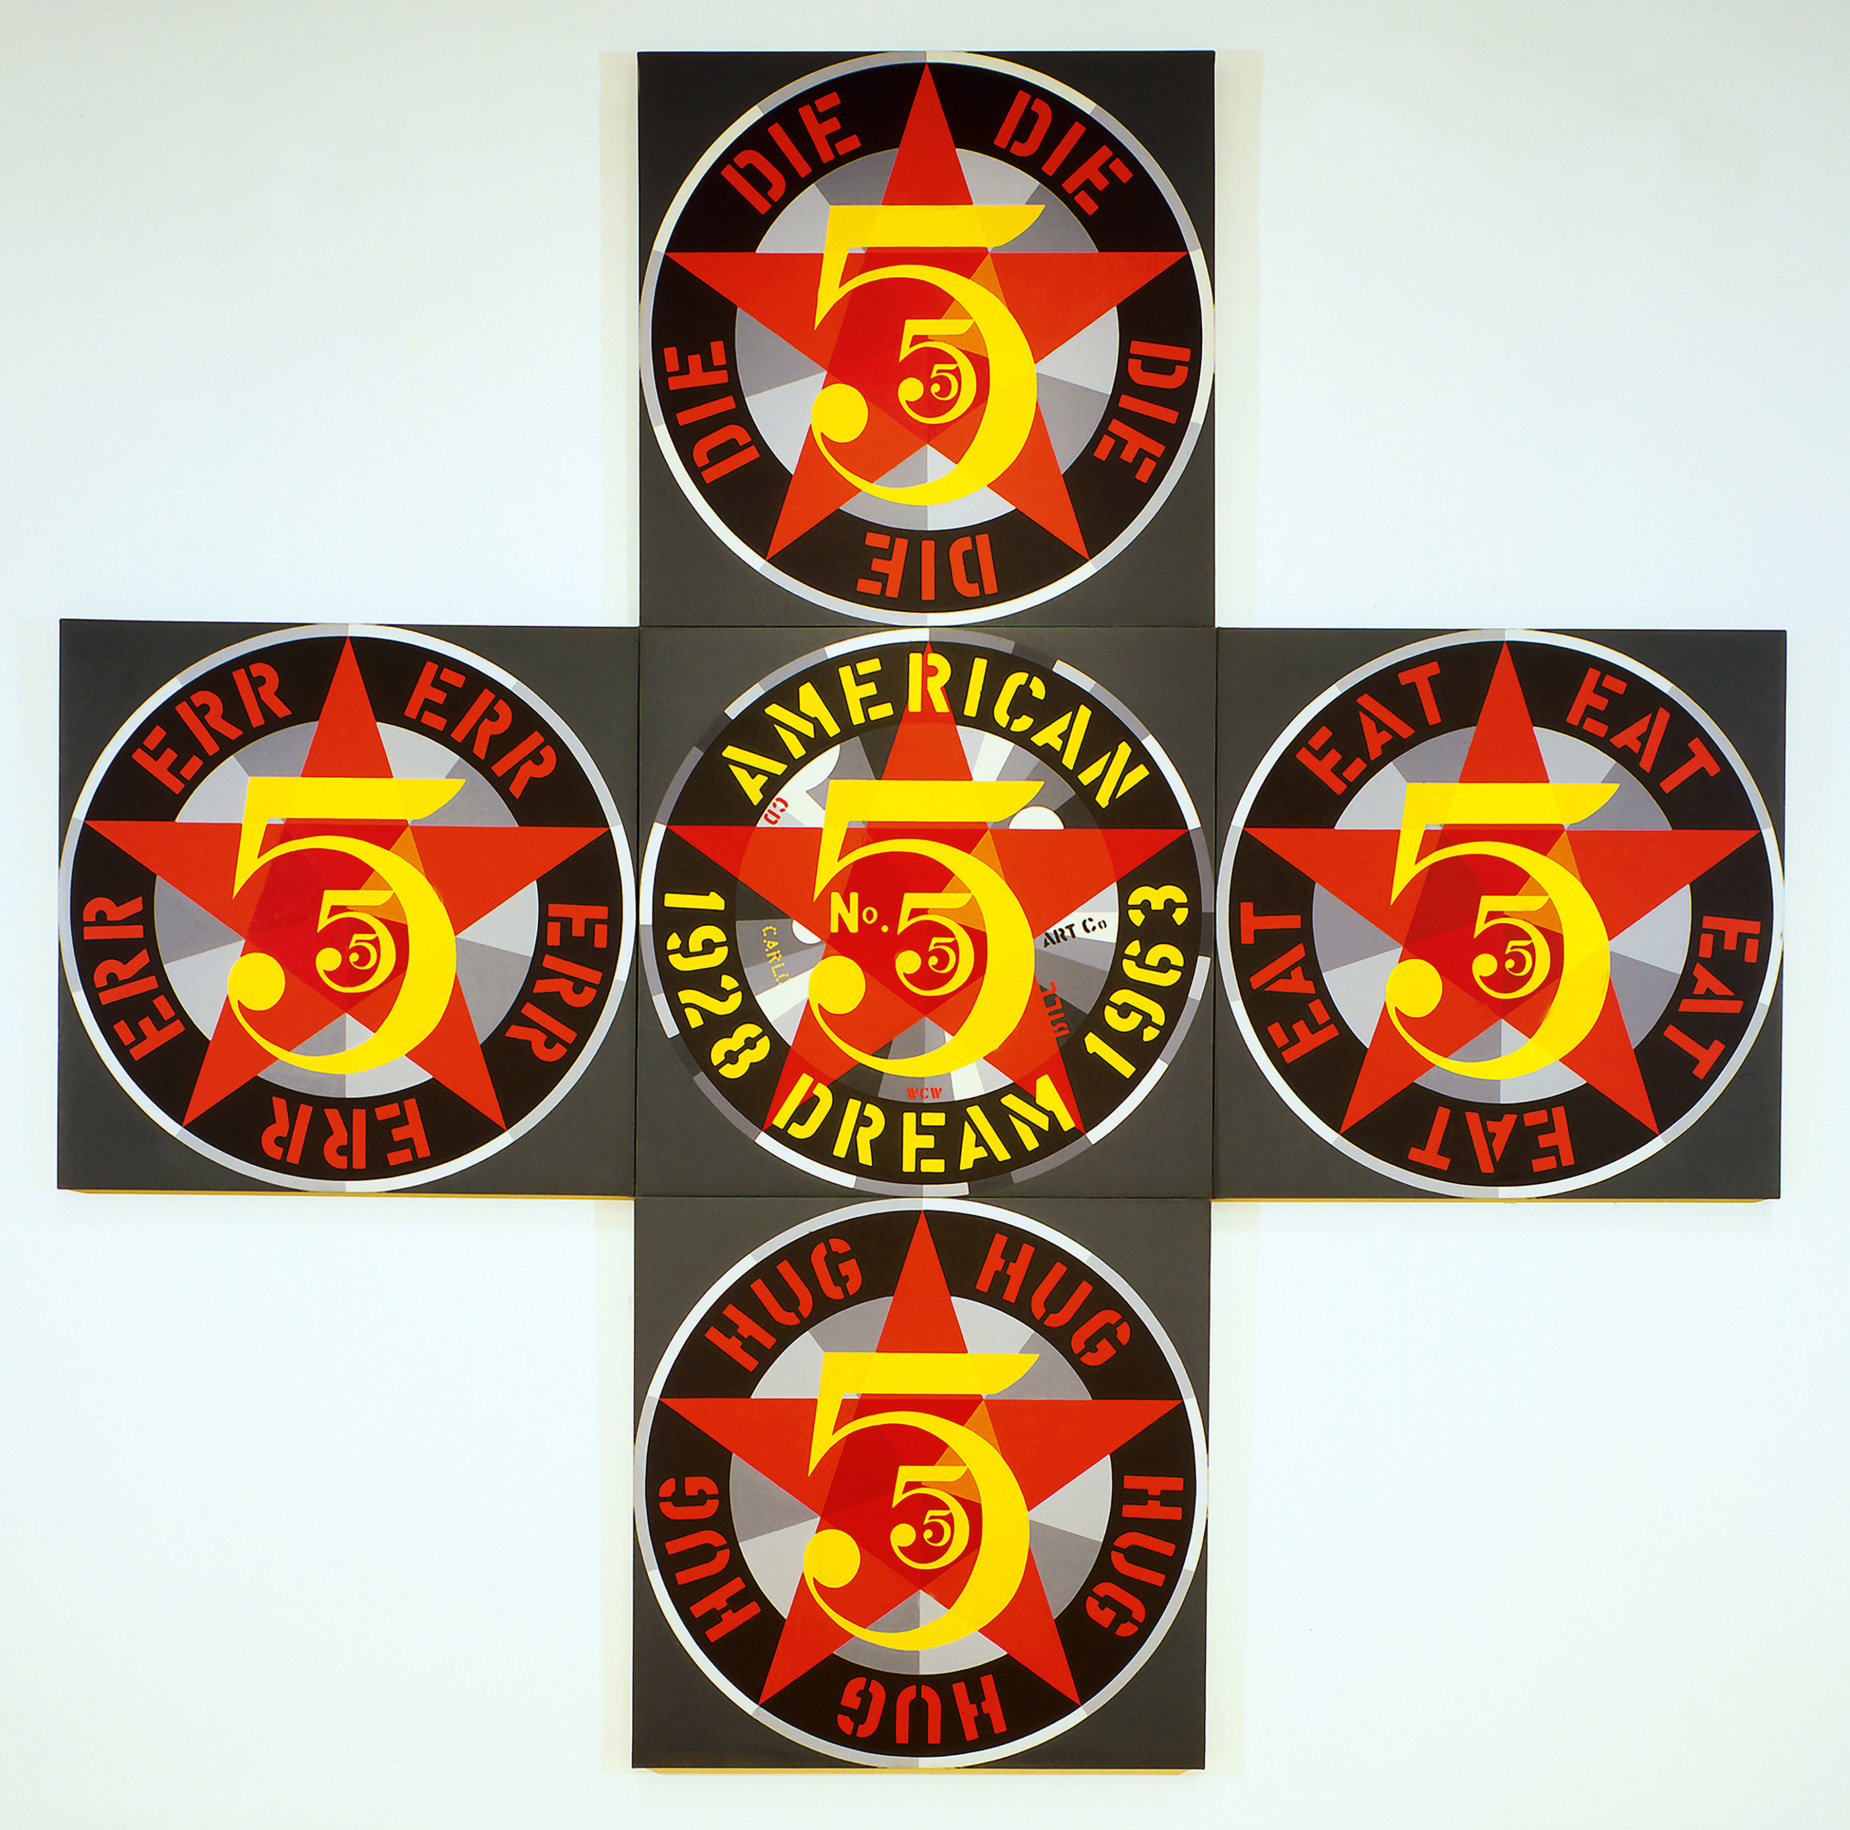 The Demuth American Dream No. 5 is a cross shaped painting made up five panels and measuring 144 by 144 inches overall. Each panel has a dark gray ground and holds a three yellow number fives in three sizes against a red star. Each panel has a black ring of text around the fives. The central ring has the text American Dream and the dates 1928 and 1963 in yellow. Each other ring contains a word painted in red which appears five times, in between each arm of the star. The word in the top panel is DIE, in the right panel it's EAT, in the lower panel HUG, and in the left panel ERR.